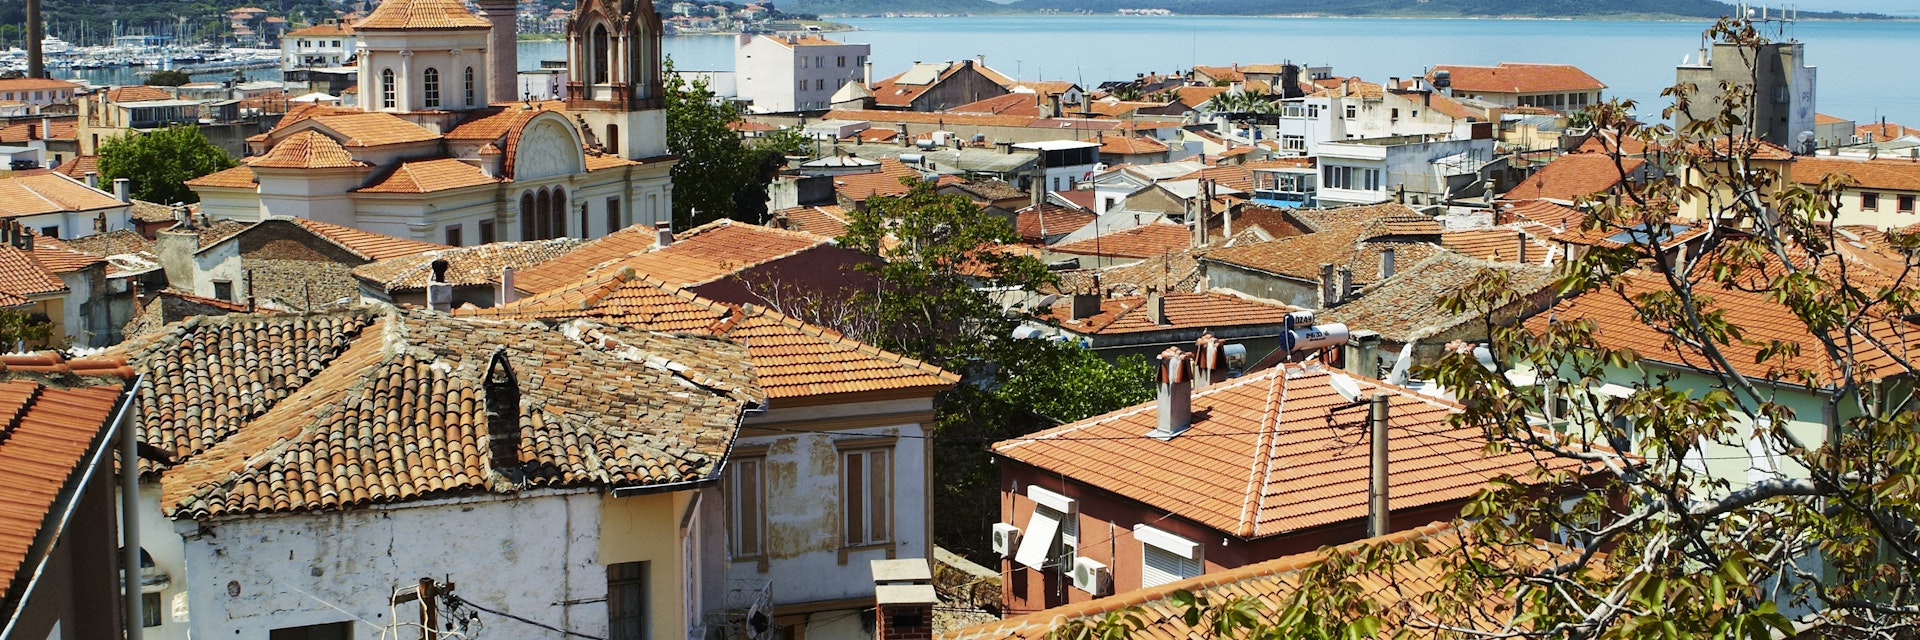 Terracotta rooftops of houses on Agean coast seen from Taksiyarhis Pension.